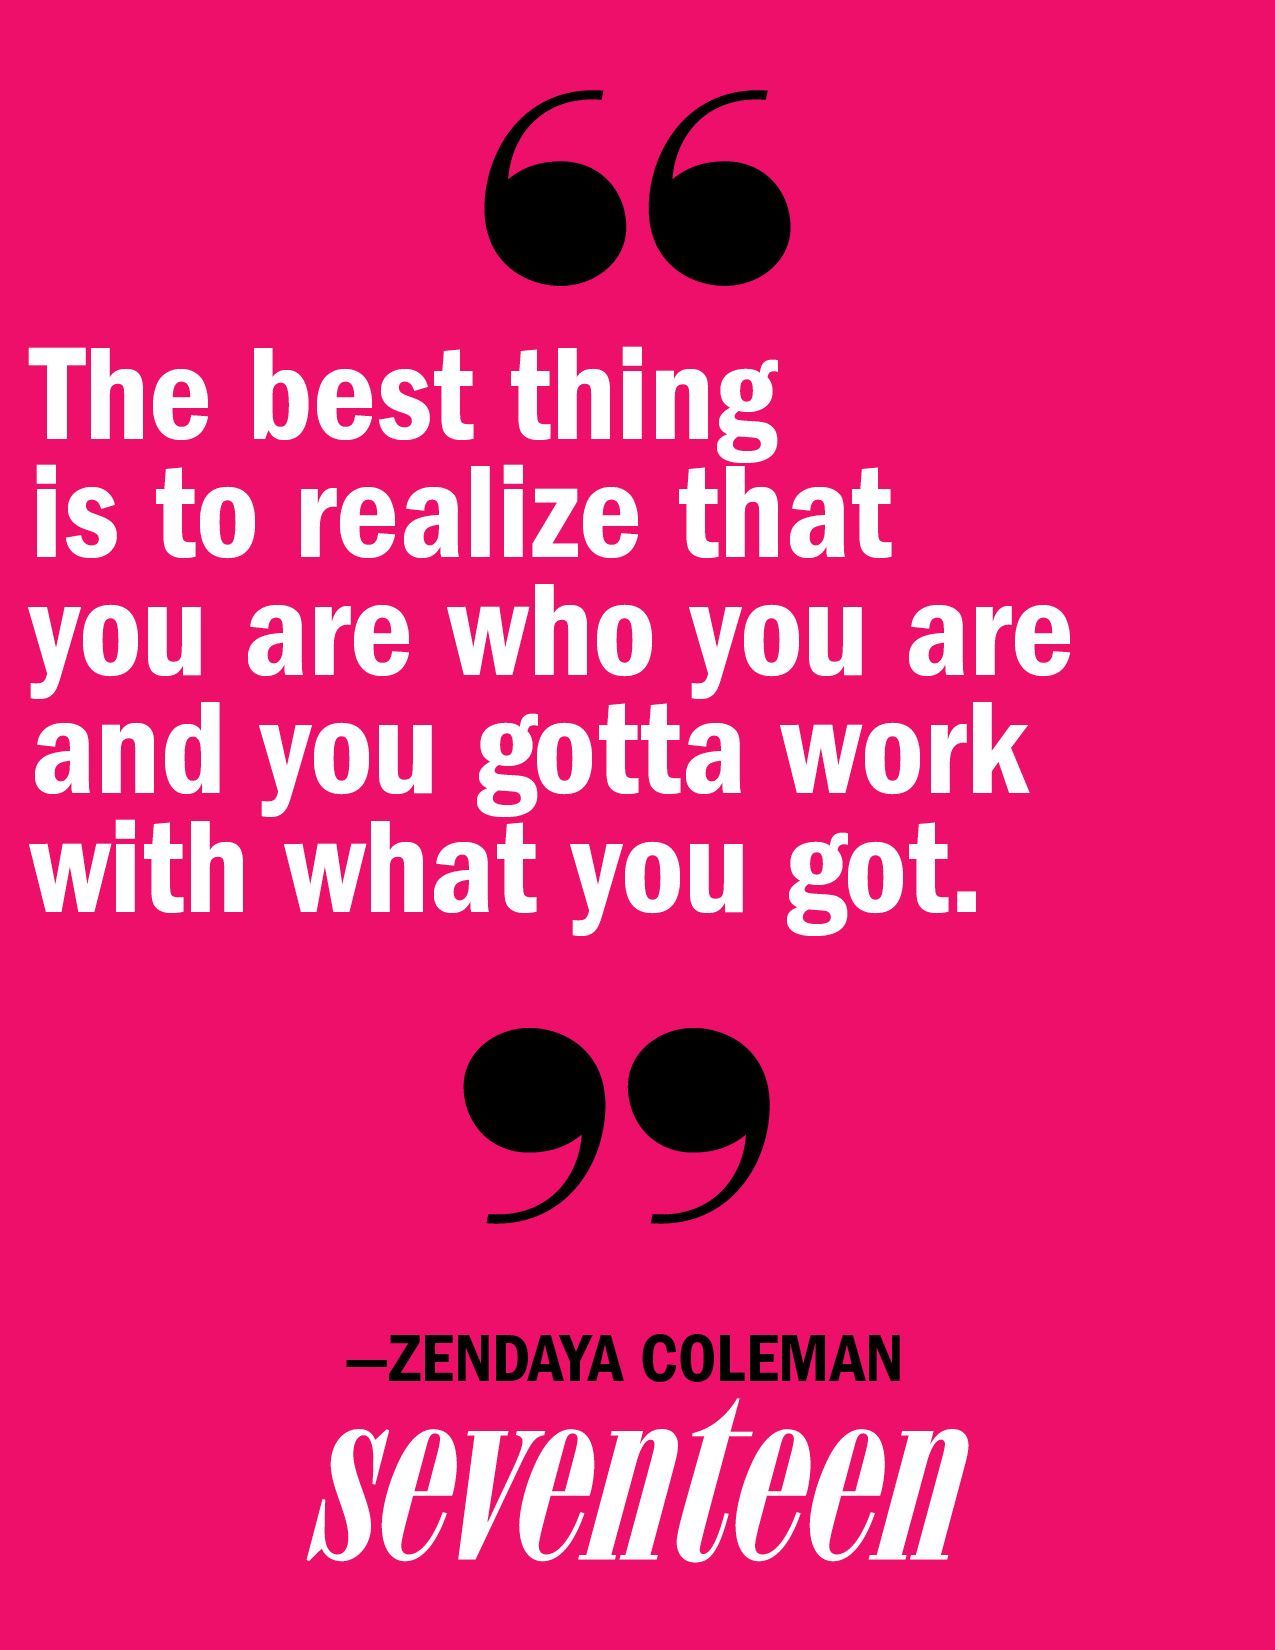 “The best thing is to realize that you are who you are and you gotta work with what you got.” – Zendaya